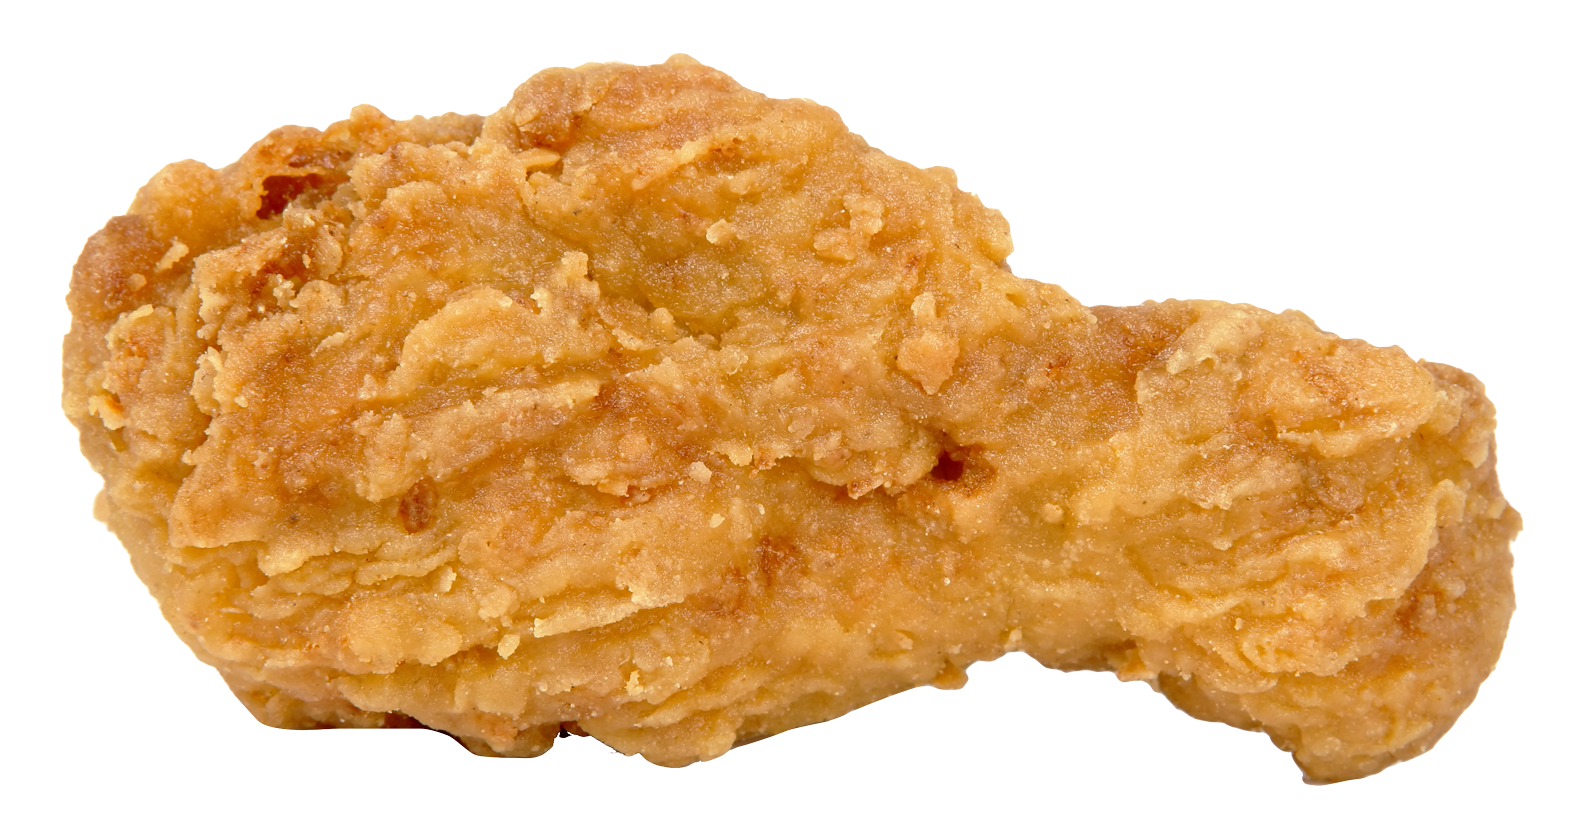 Fried PNG Image High Quality PNG Image